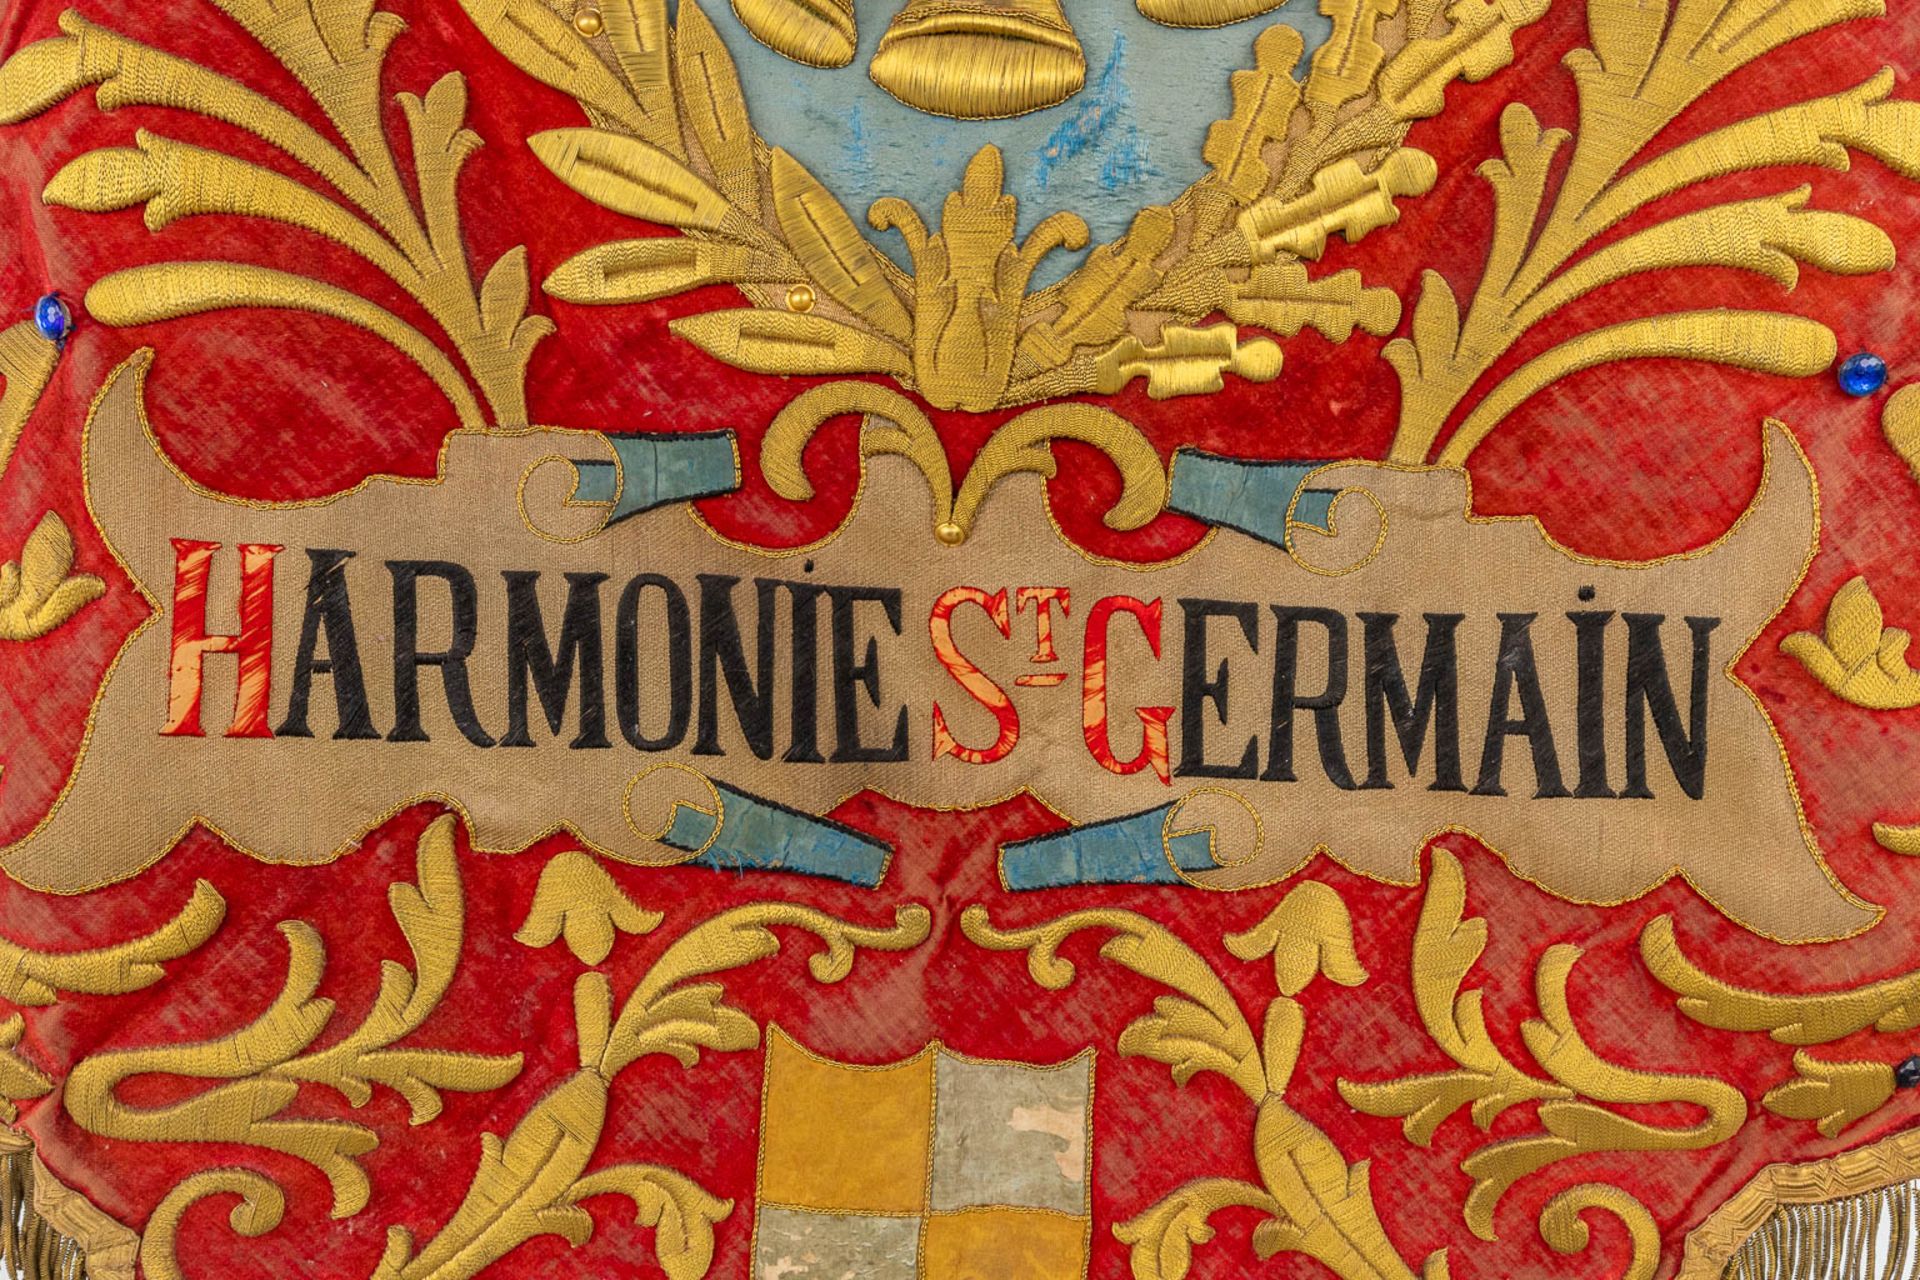 An antique banner, 'Harmonie Saint Germain, Couvin', and used in the front of a marching orchestra. - Image 3 of 10